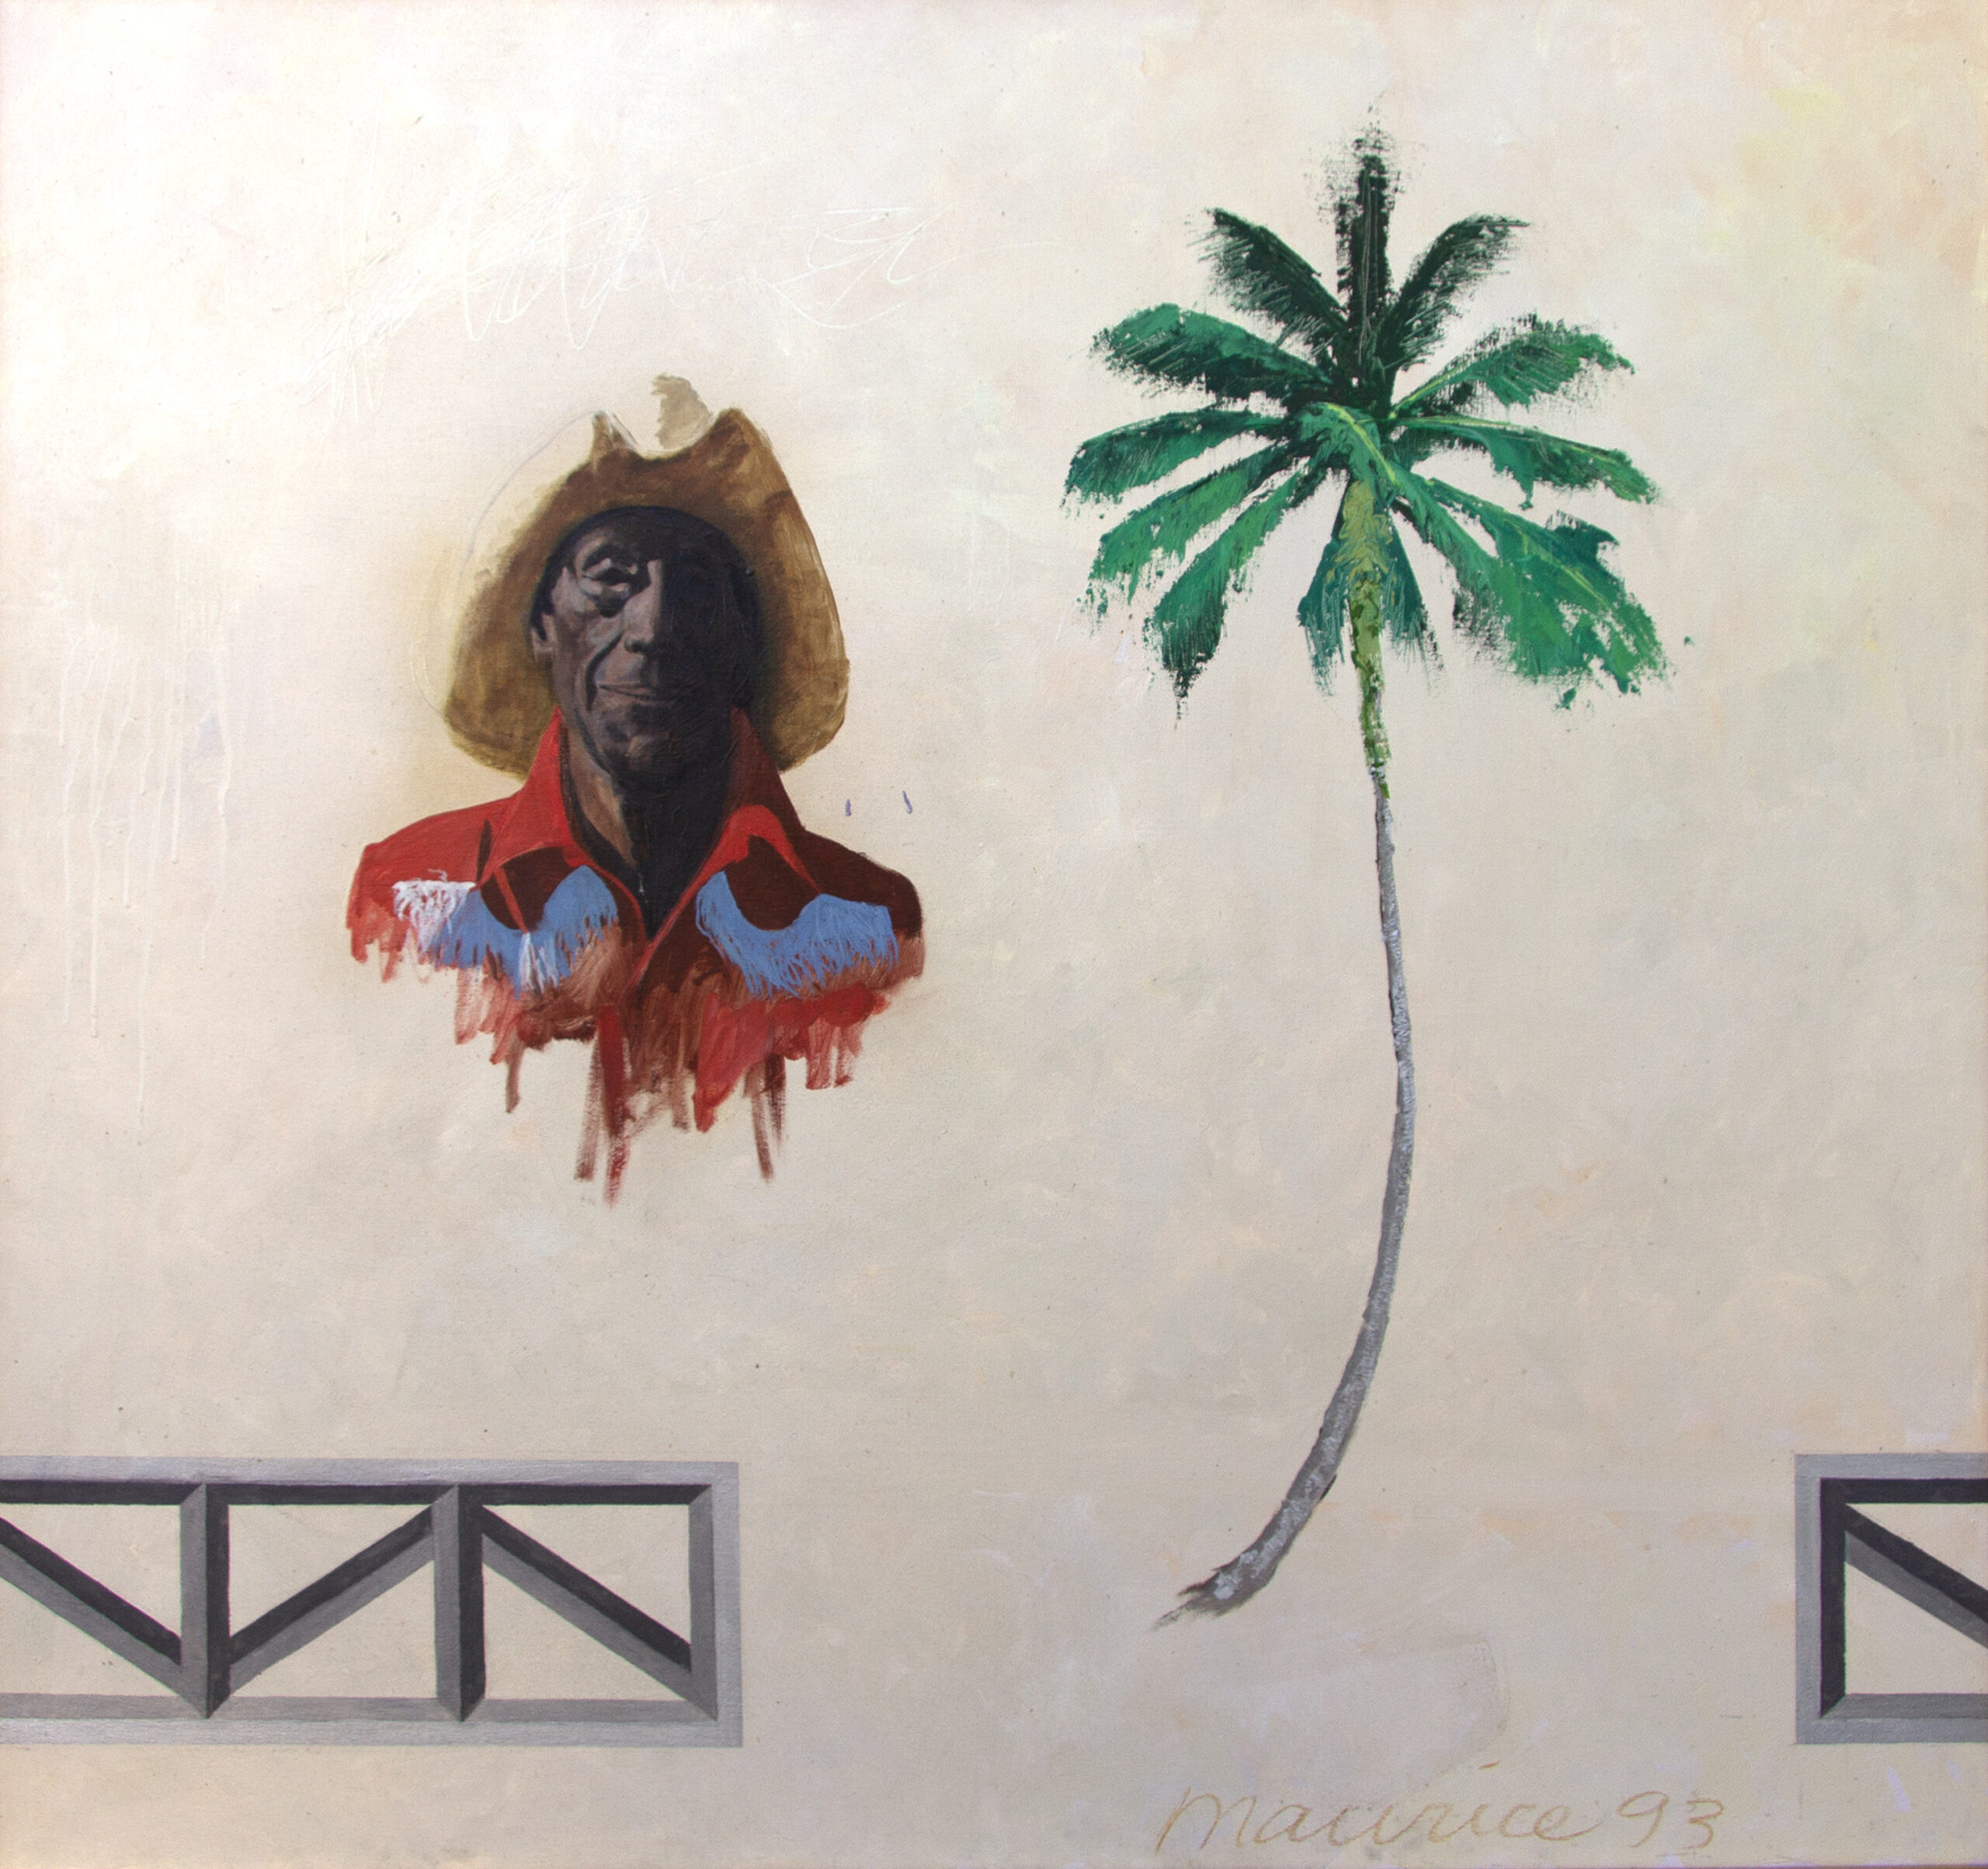 
		                					Maurice Burns		                																	
																											<i>Oldest Man,</i>  
																																								1993, 
																																								oil on canvas, 
																																								48 x 45 inches 
																								
		                				